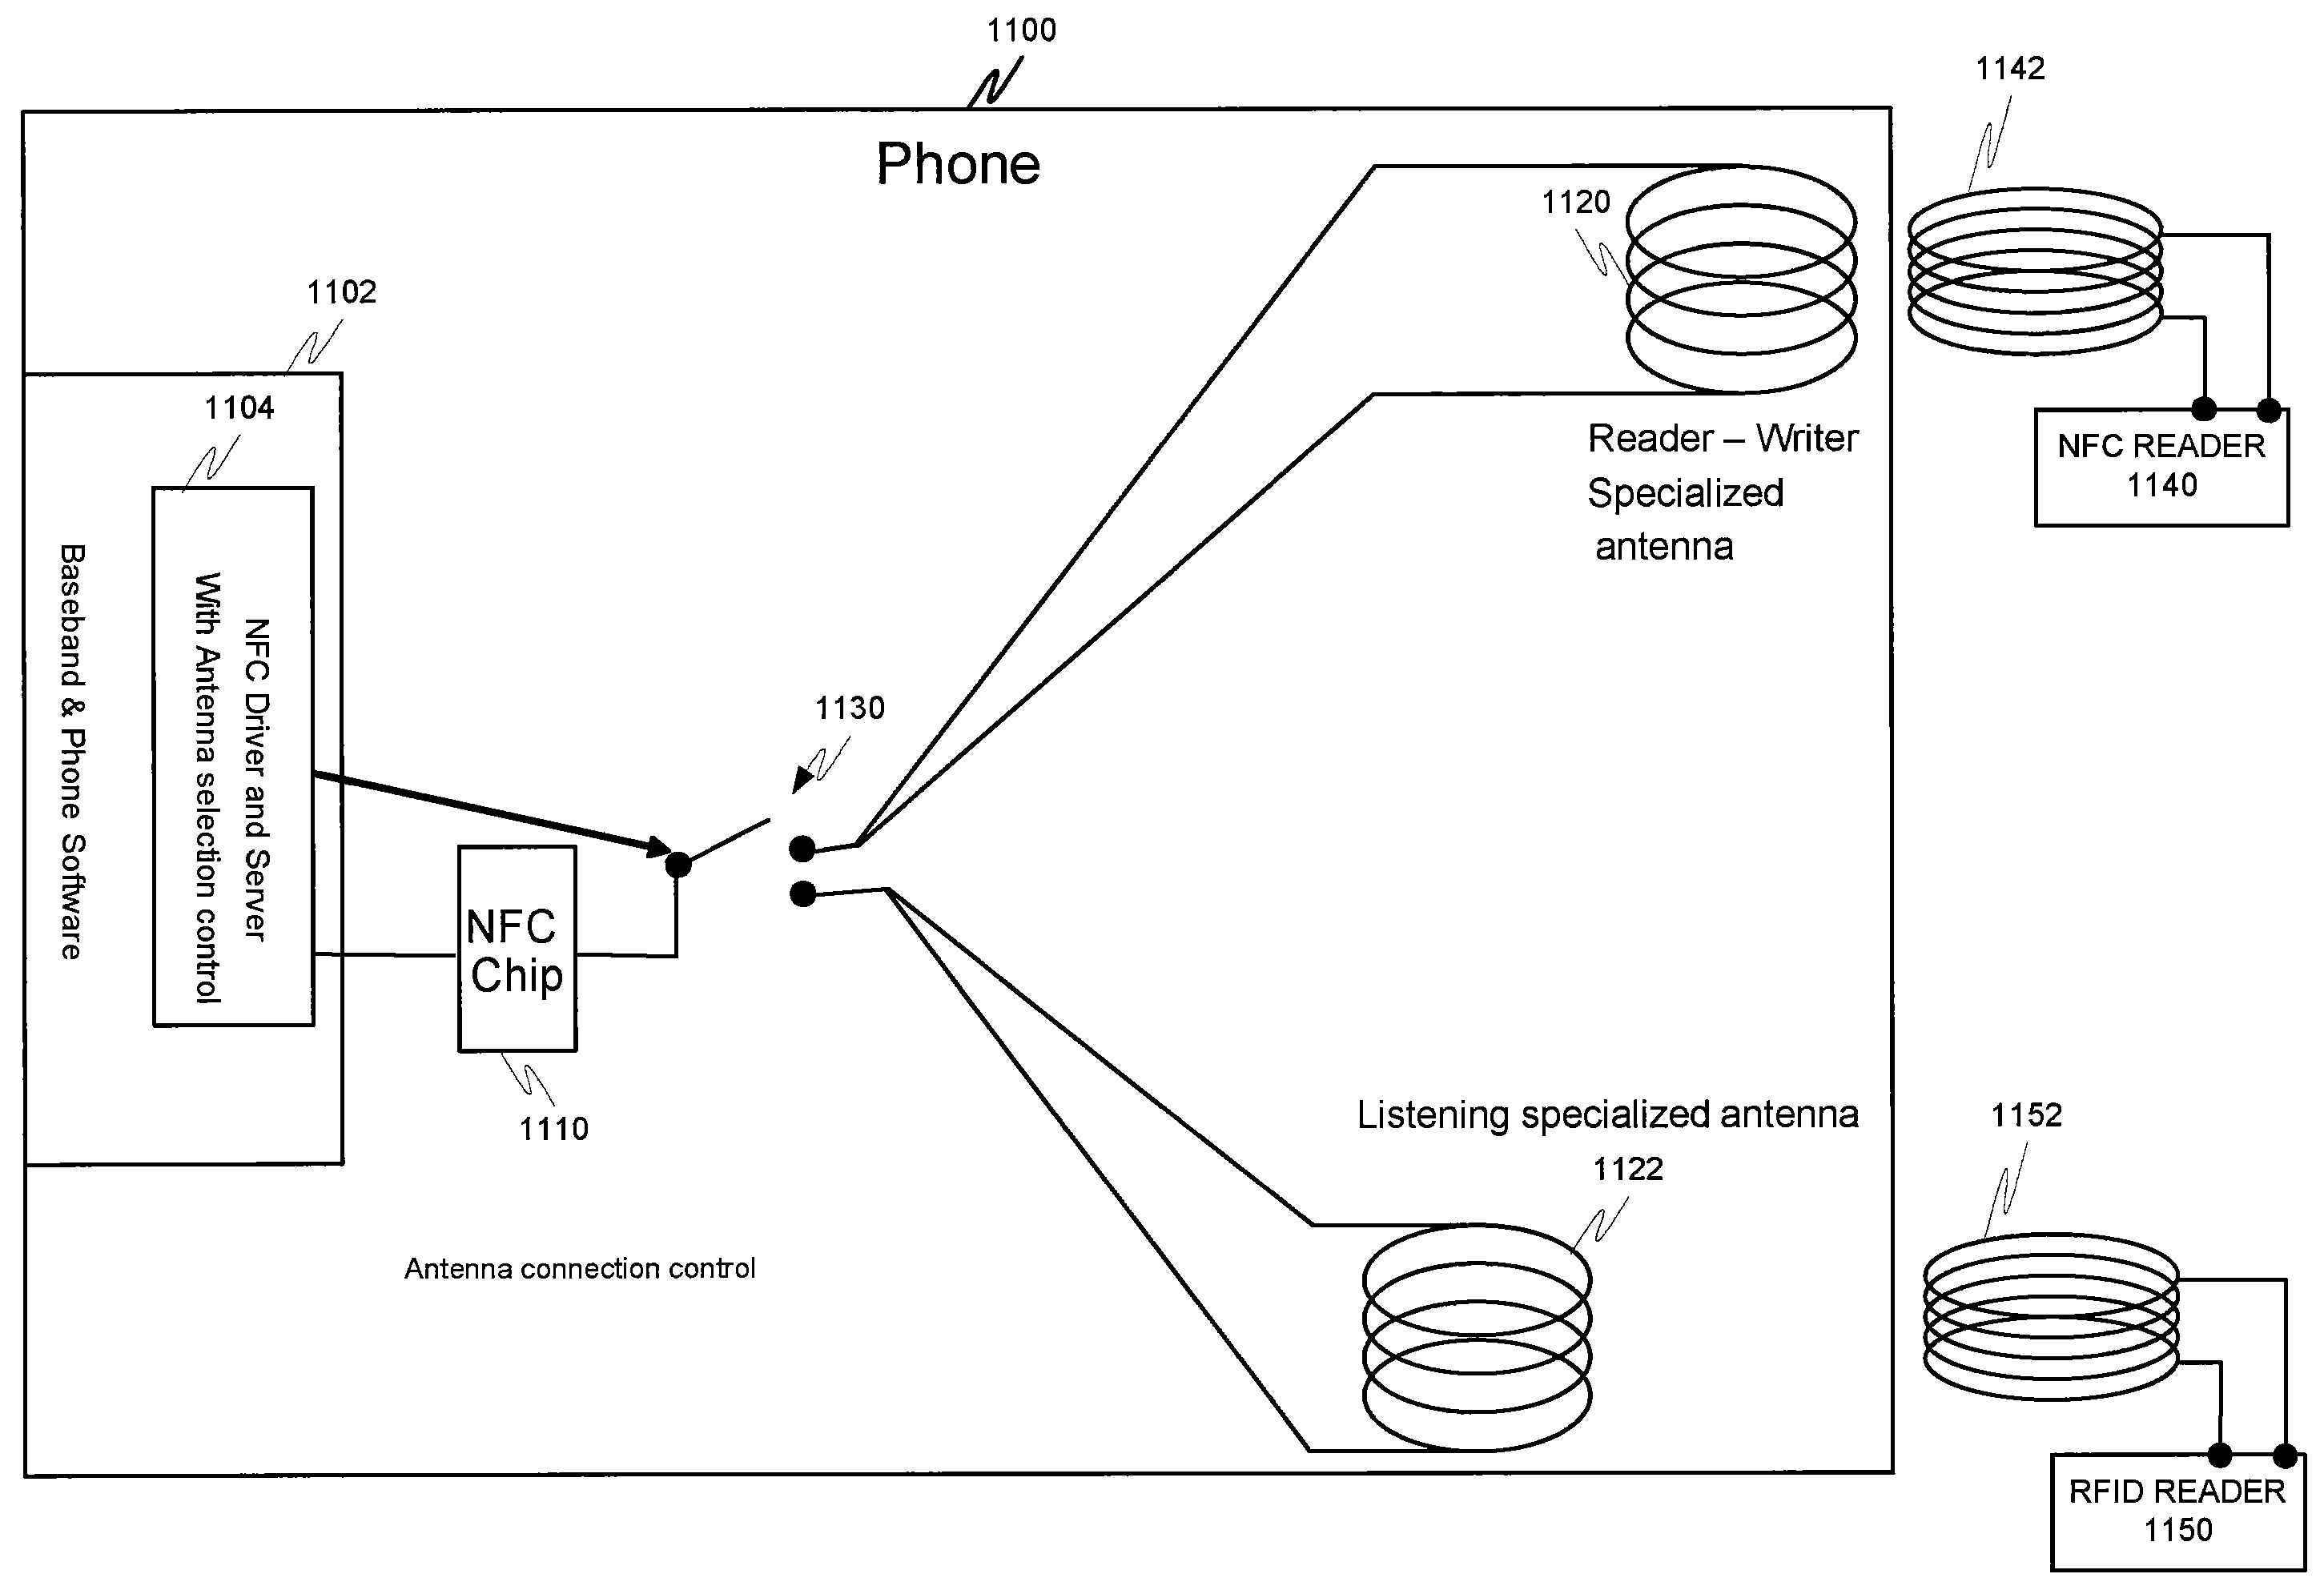 Apparatus and method for controlling diverse short-range antennas of a near field communications circuit